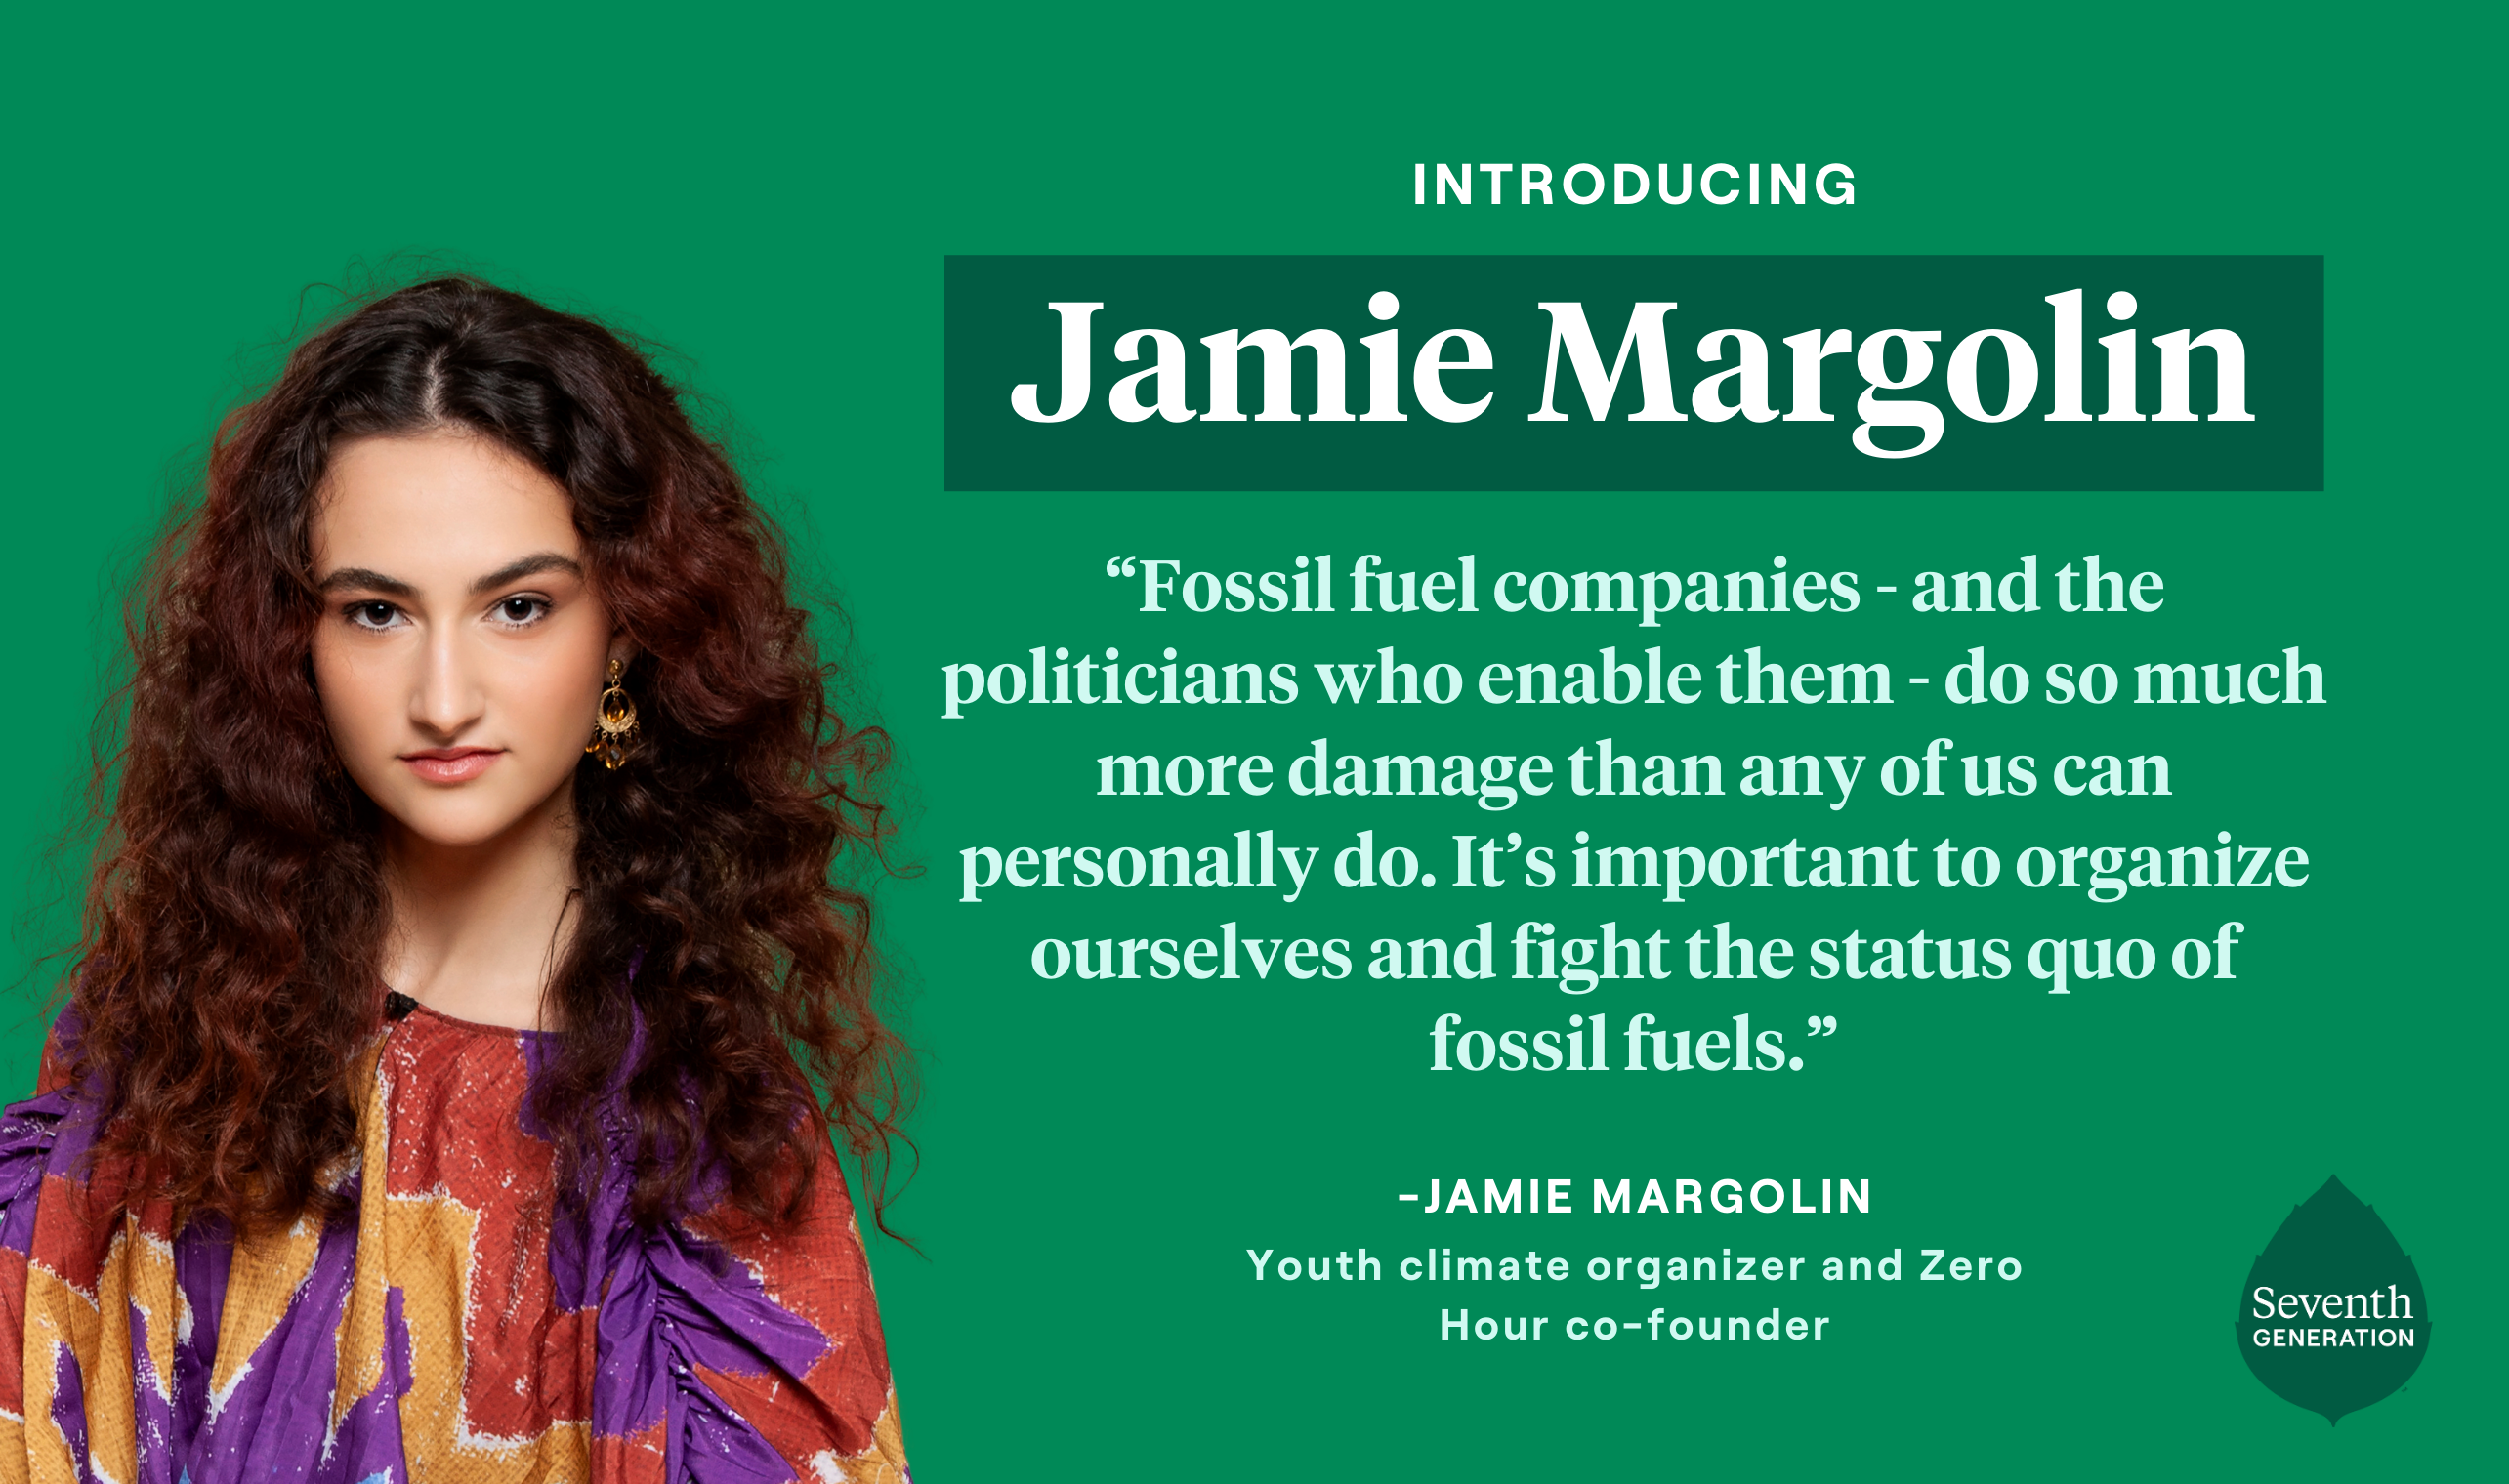 Introducing Jamie Margolin: Fossil Fuel companies - and the politicians who enable them - do so much more damage than any of us can personally do...